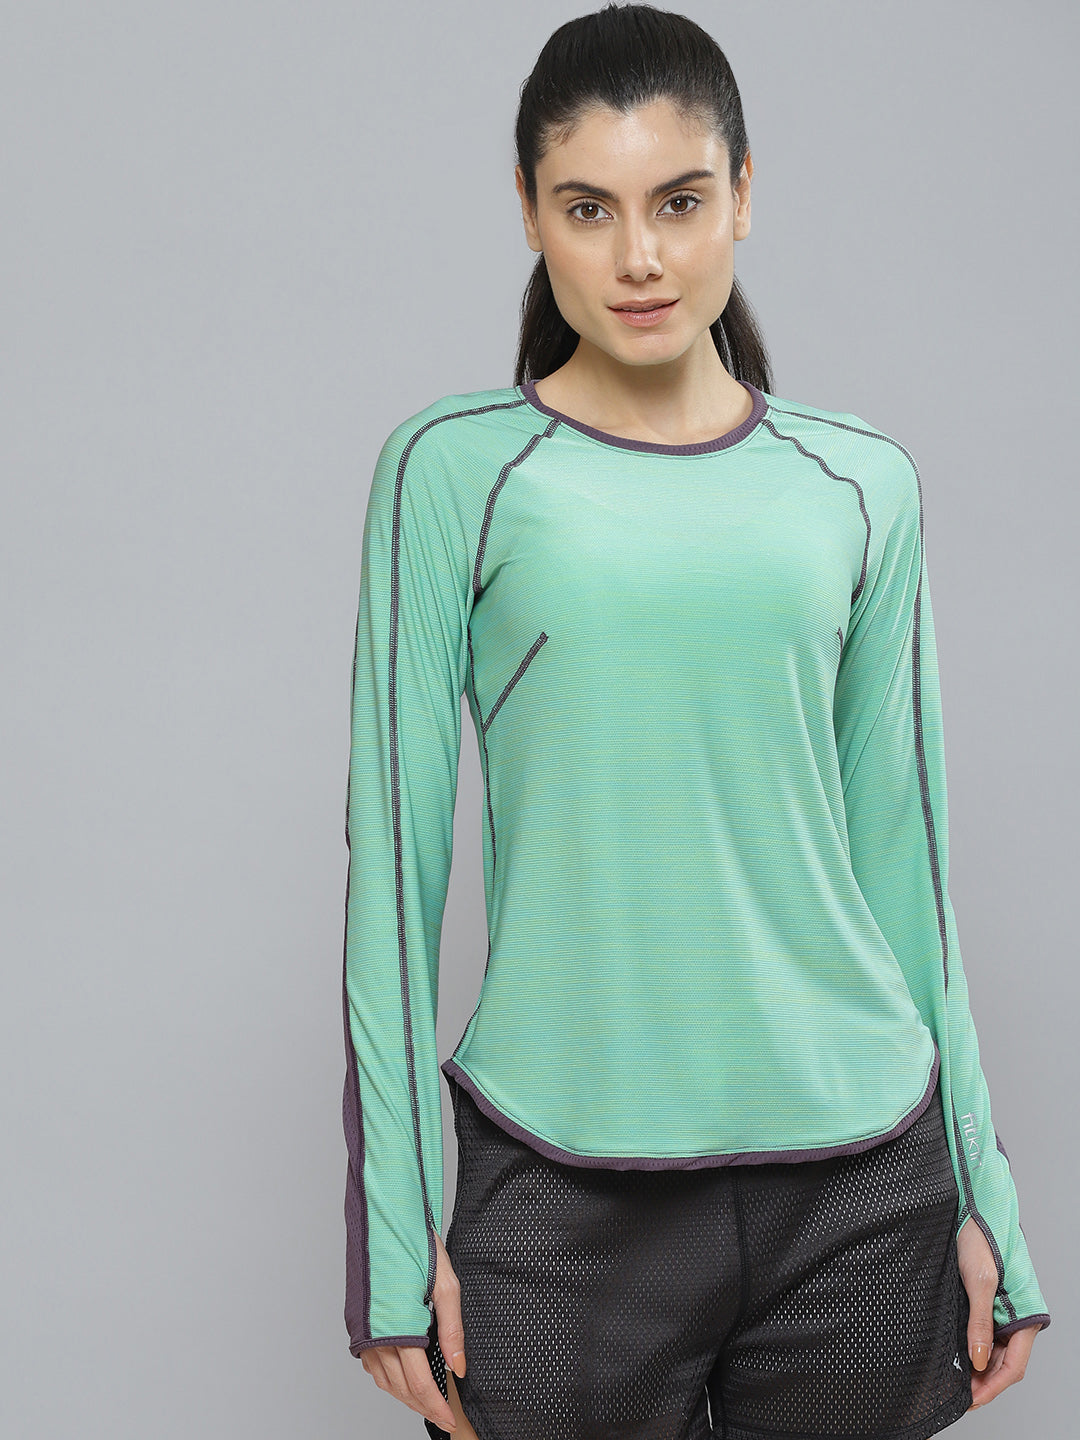 Fitkin women's green round neck back laser cut design full sleeves t-shirt